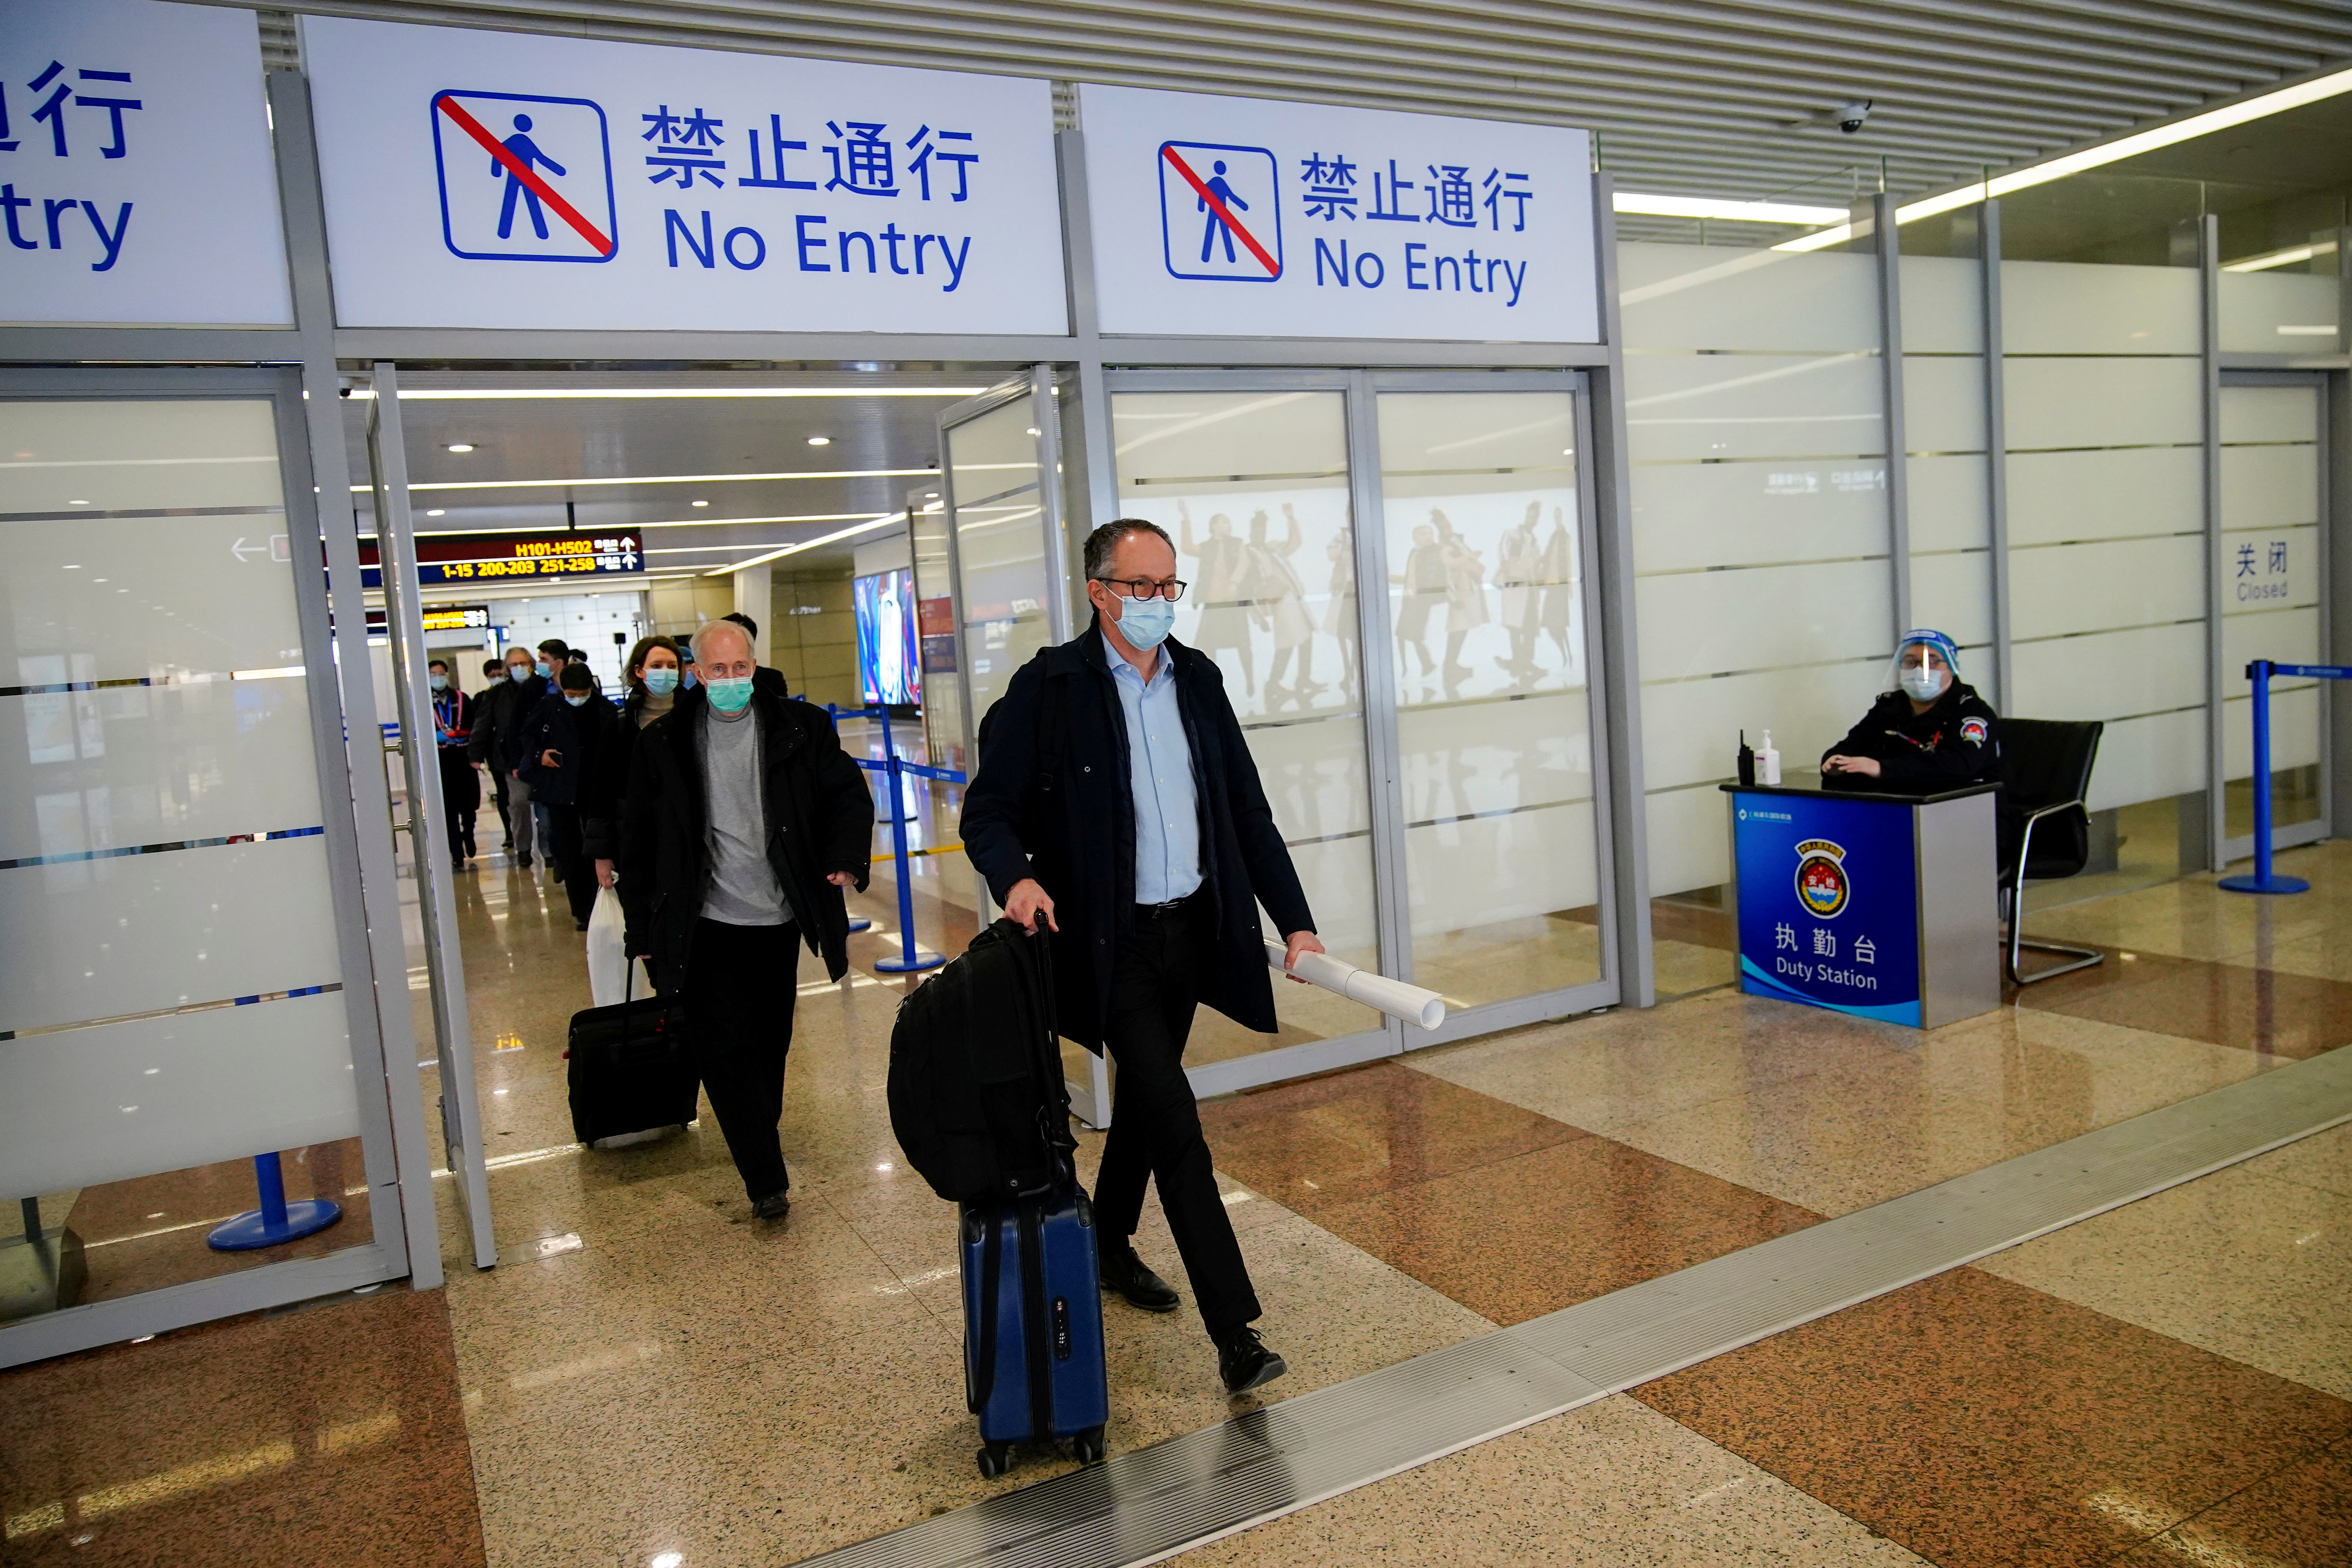 Members of the World Health Organisation (WHO) arrive at the airport in Shanghai